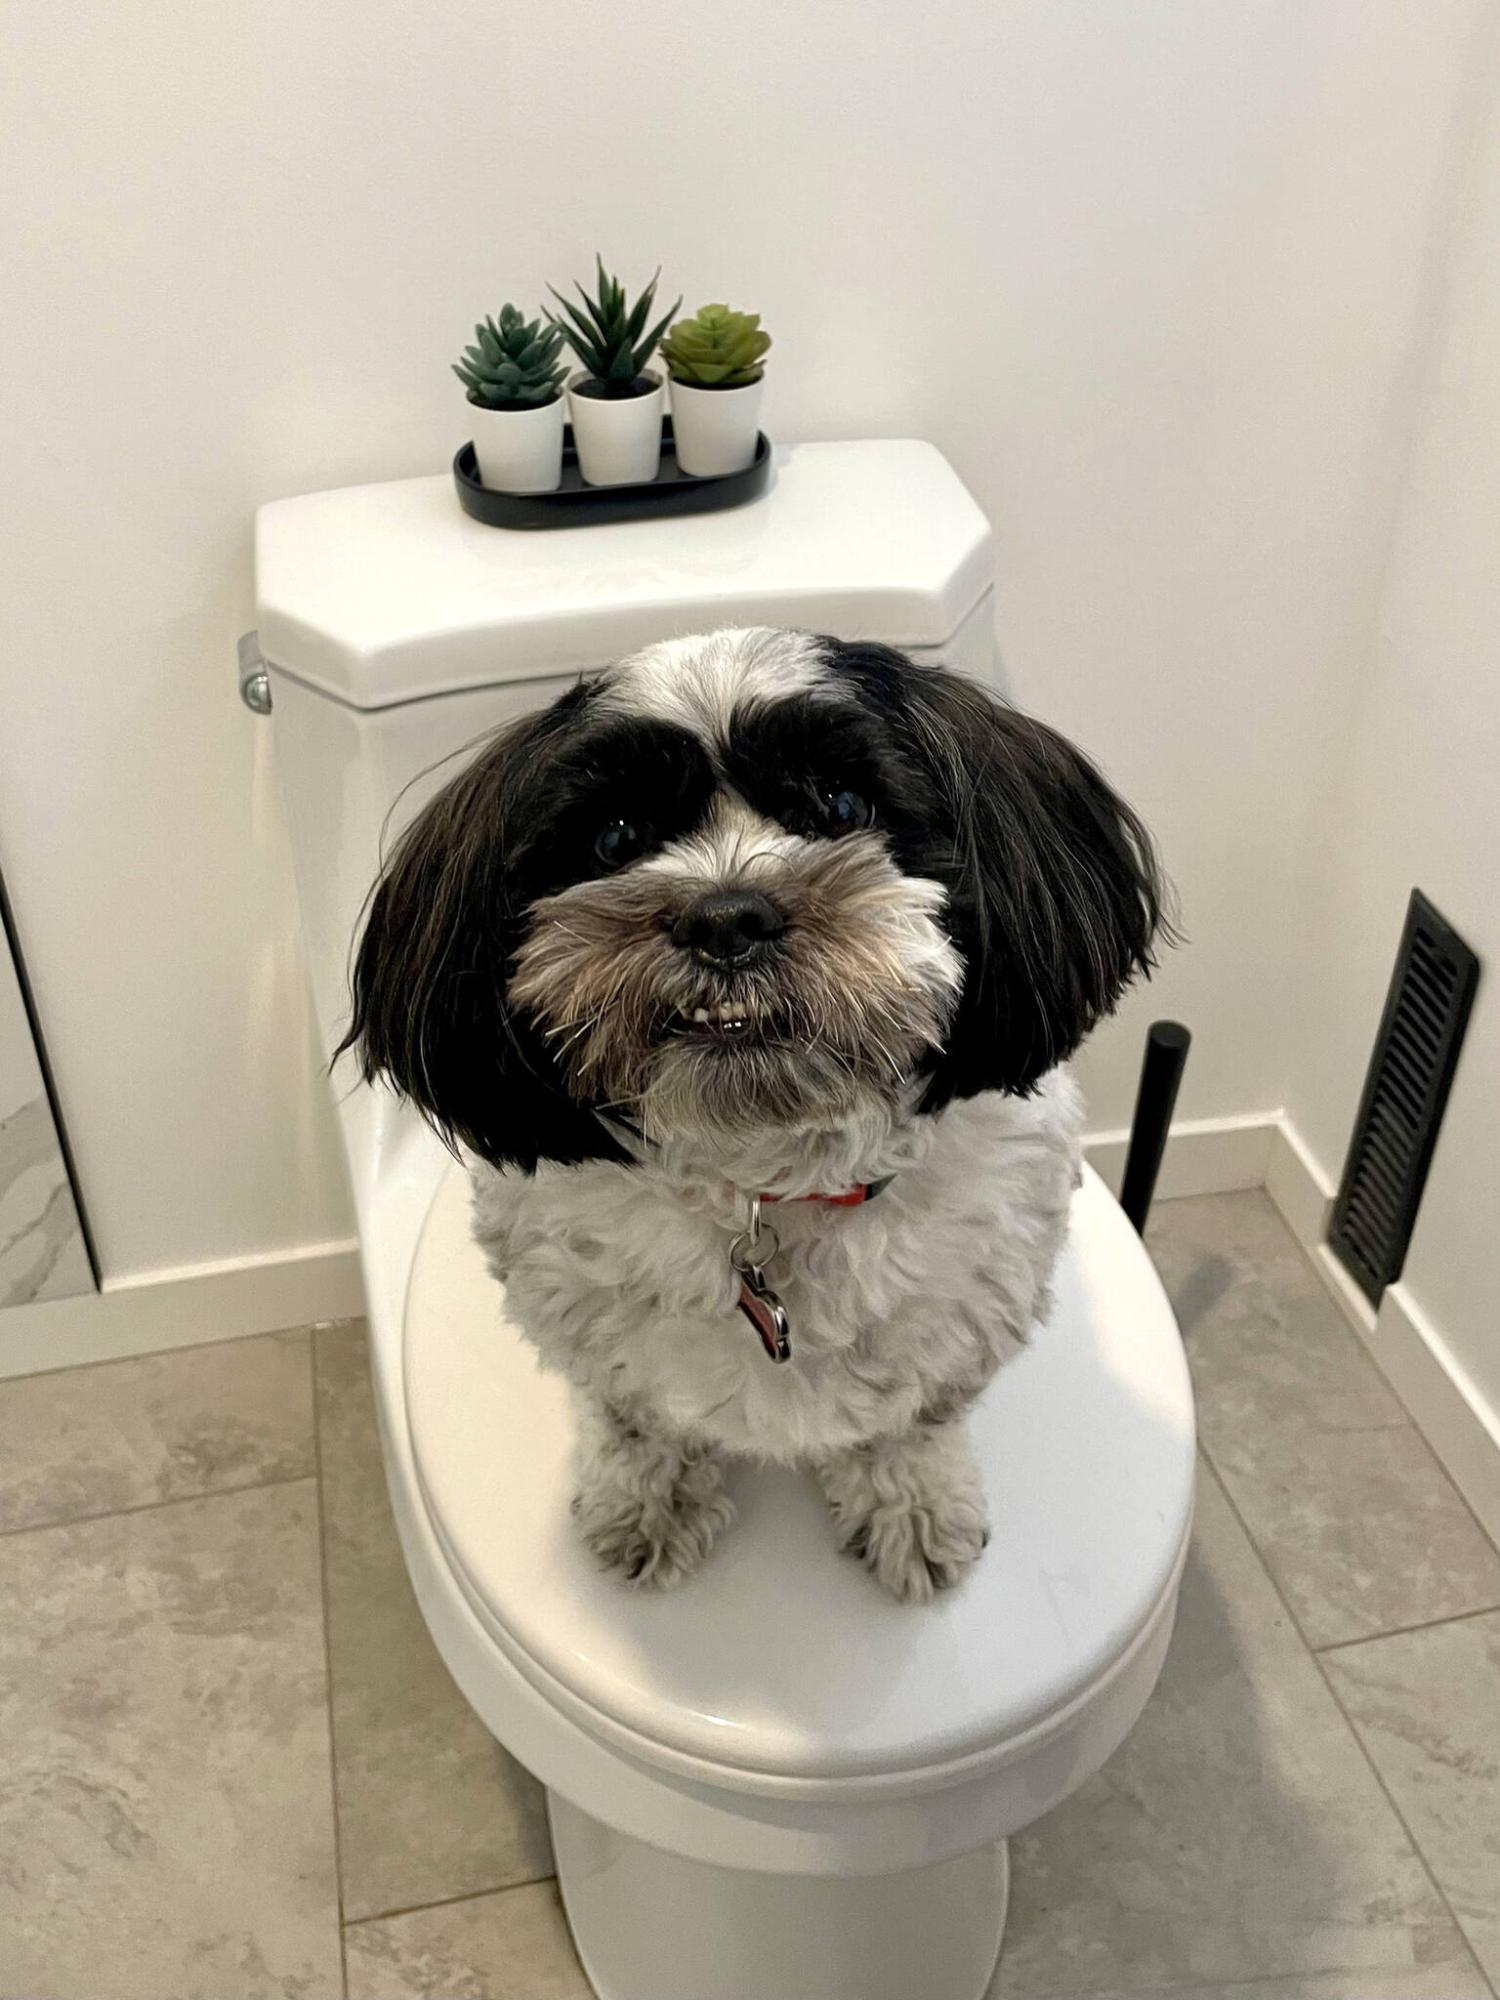  <p>Photos by Marc LaBossiere / Free Press</p>
                                <p>Moe sits proudly in the newly renovated bathroom that may (or may not) have been designed to match his fur.</p> 